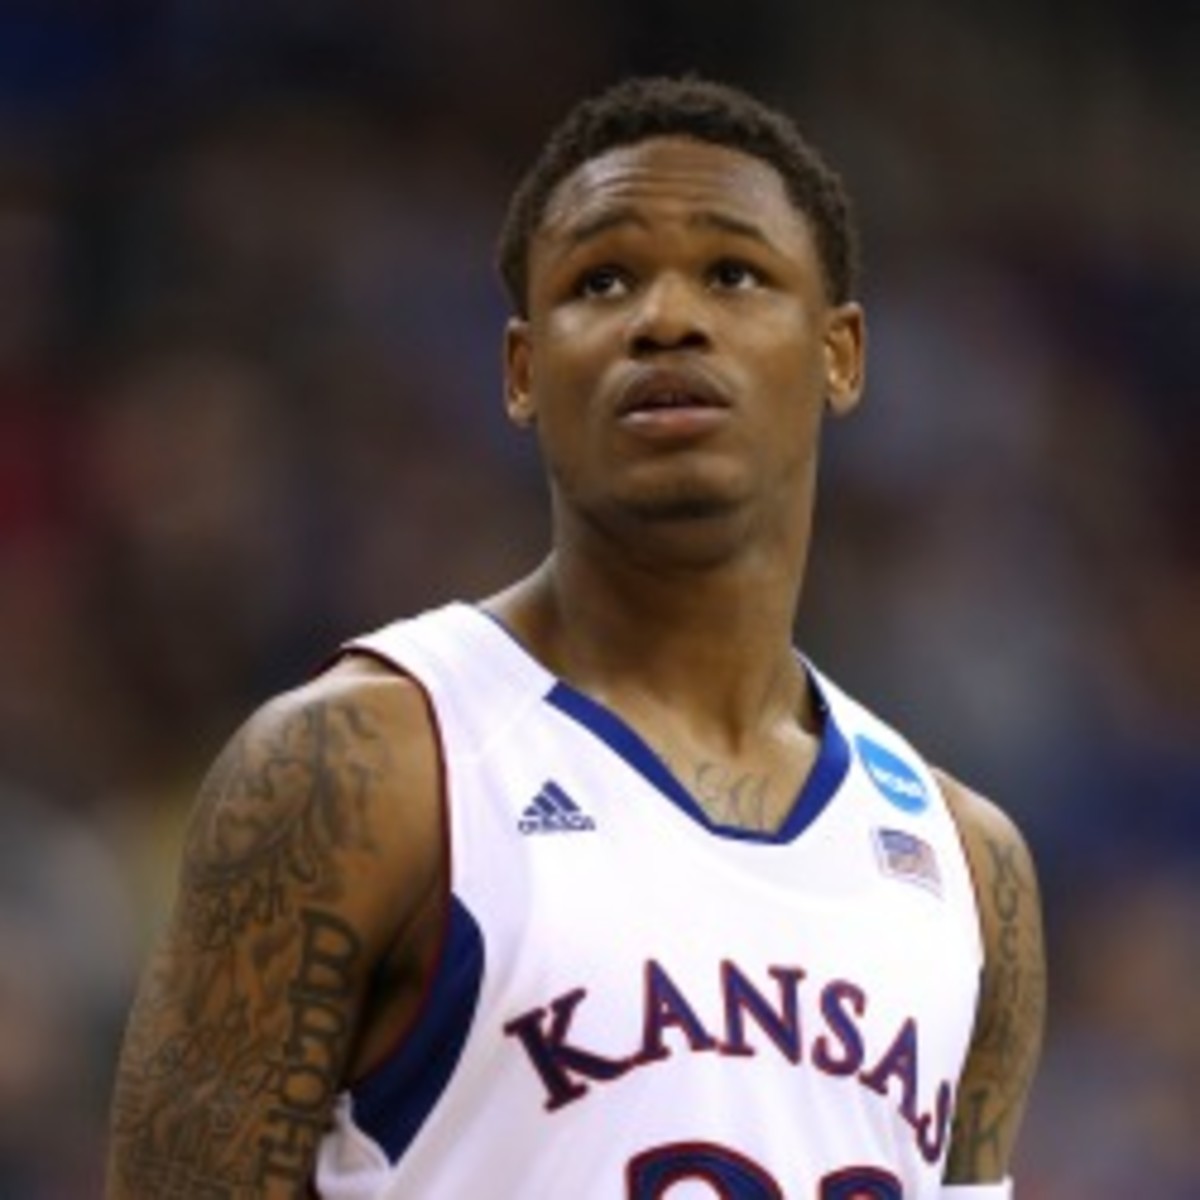 Former Kansas guard Ben McLemore is expected to be a lottery pick in the NBA Draft. (Ed Zurga/Getty Images)